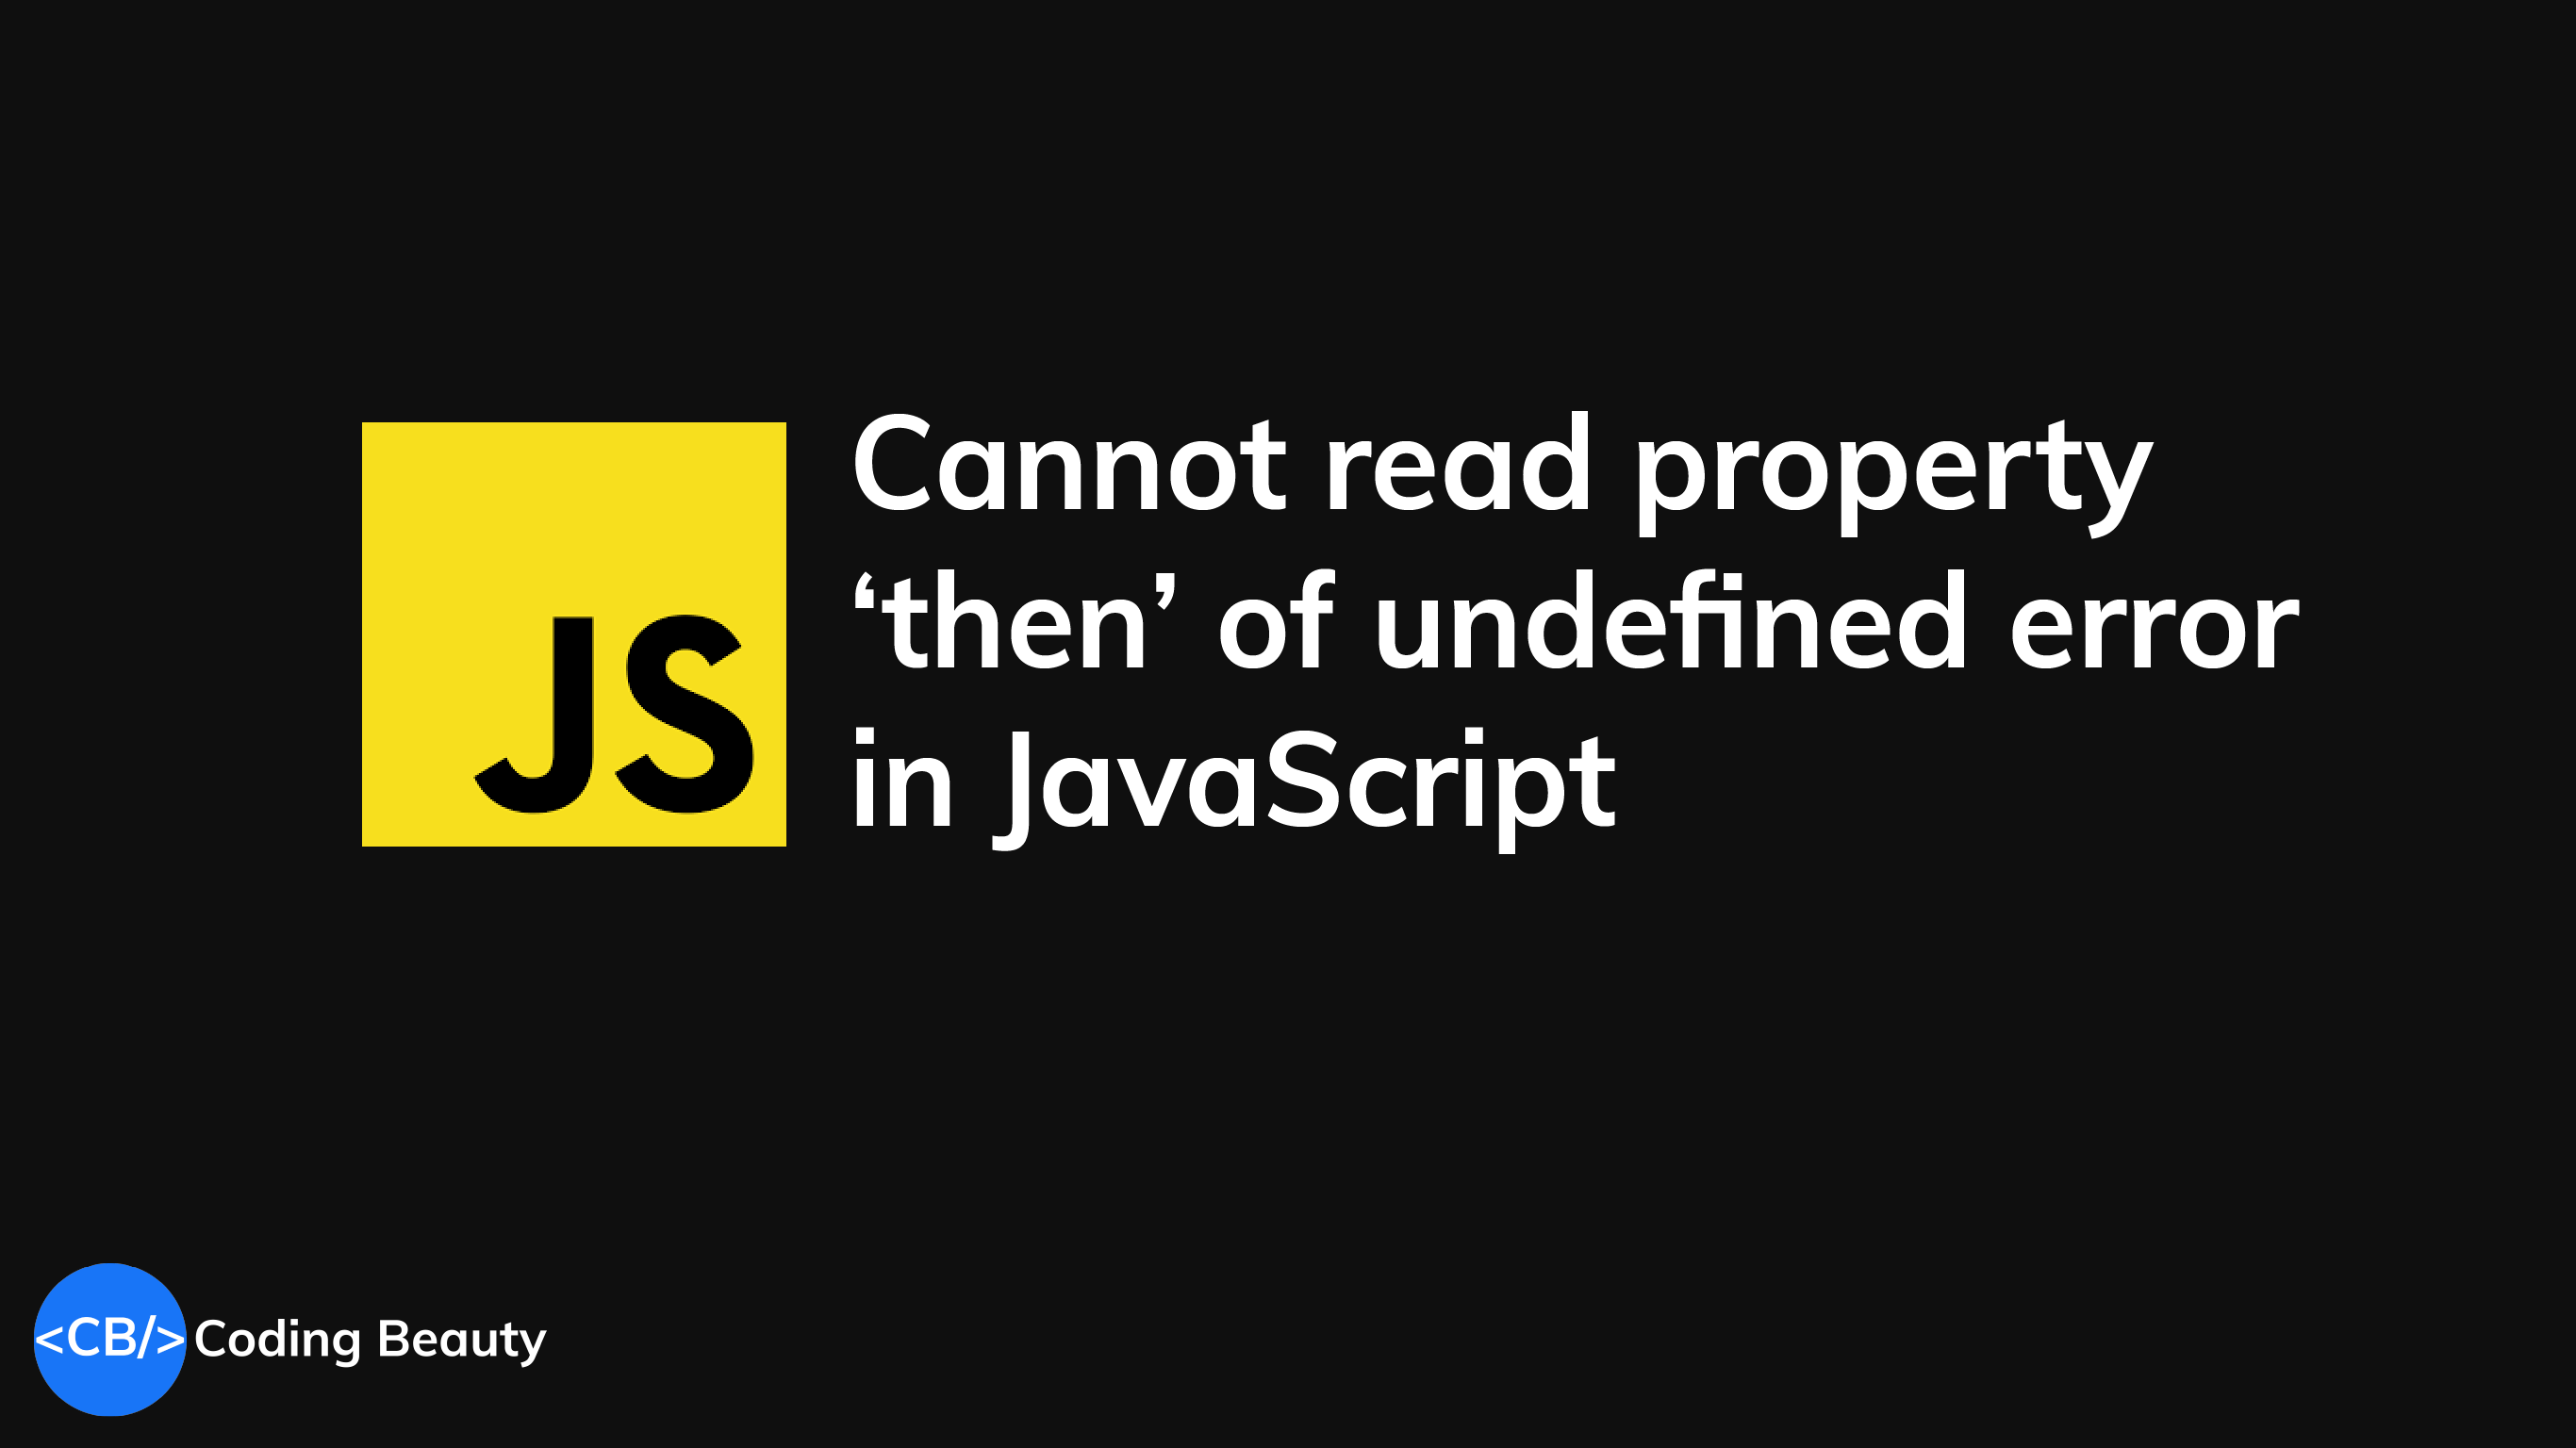 How to quickly fix the "Cannot read property 'then' of undefined" error in JavaScript